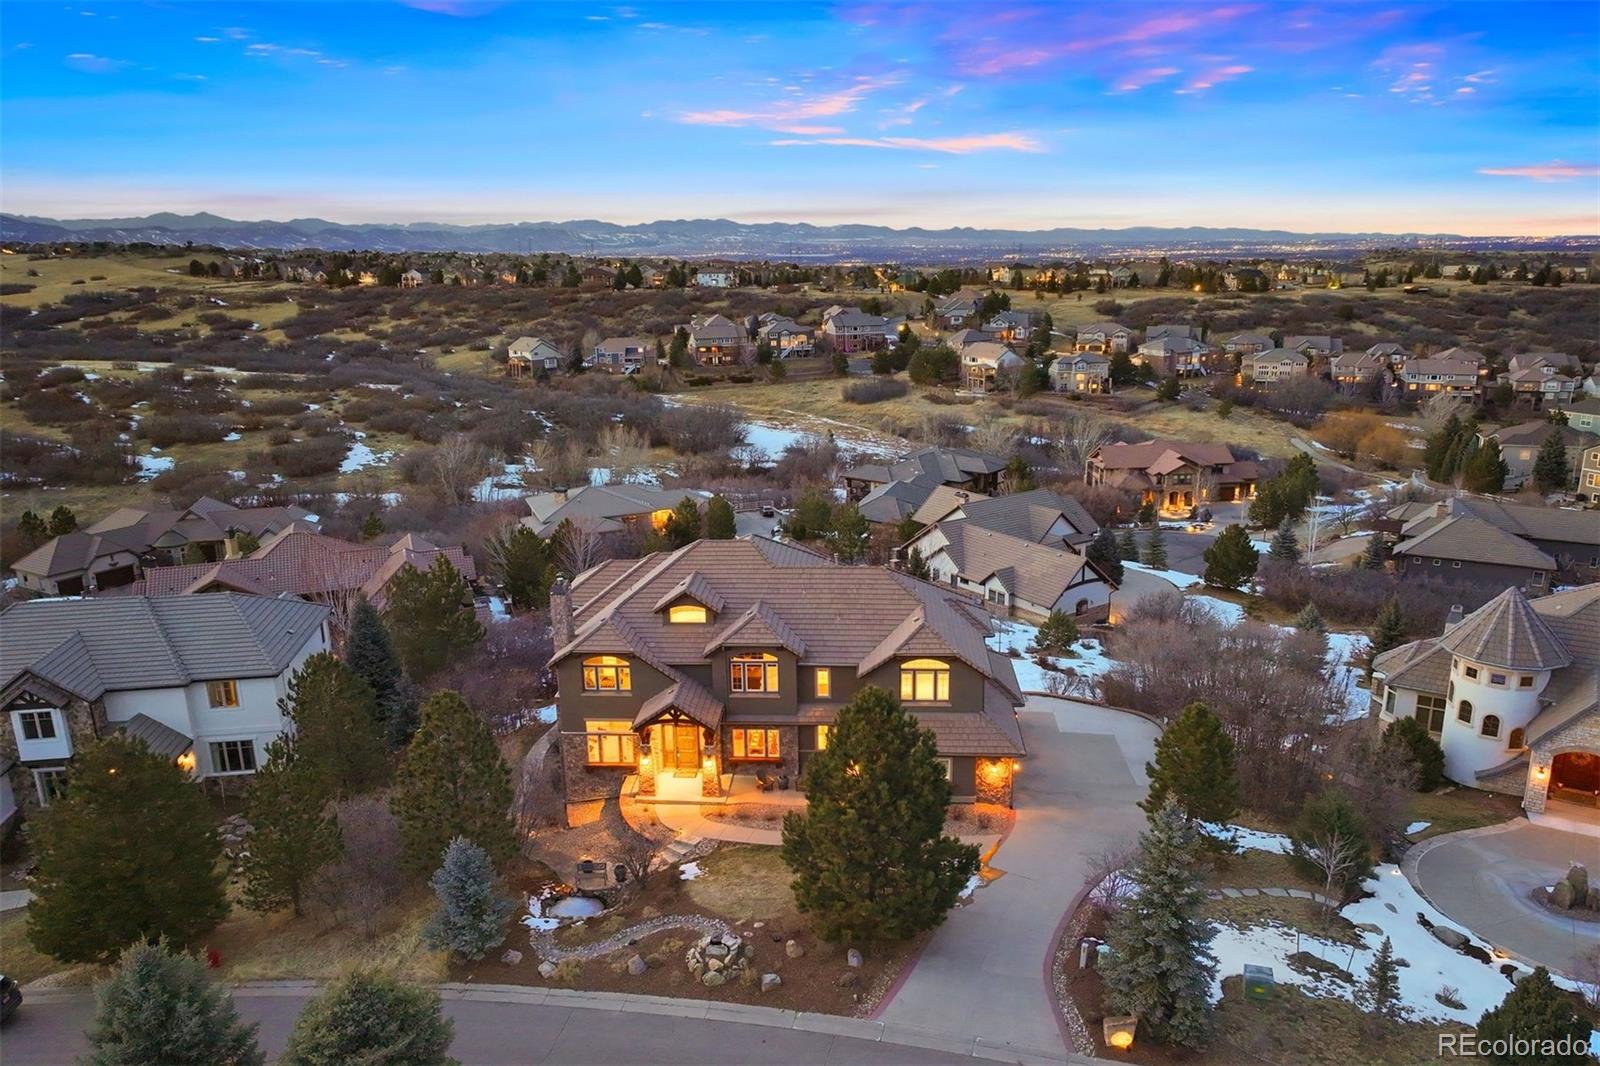 6805  twisted oak drive, castle pines sold home. Closed on 2024-05-10 for $2,085,000.